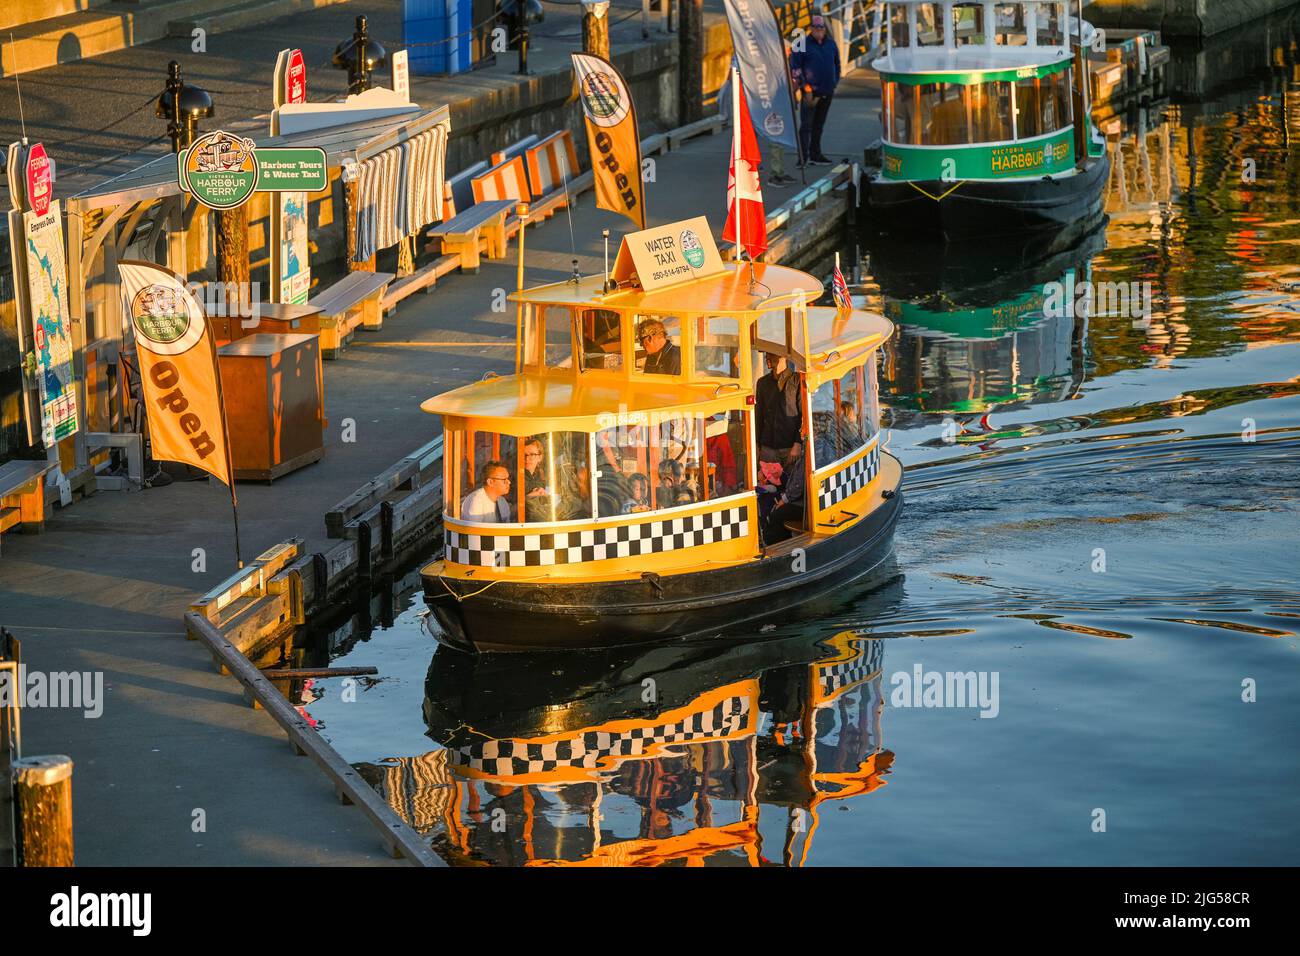 Water taxi, passenger ferry, Inner Harbour, Victoria, British Columbia, Canada Stock Photo